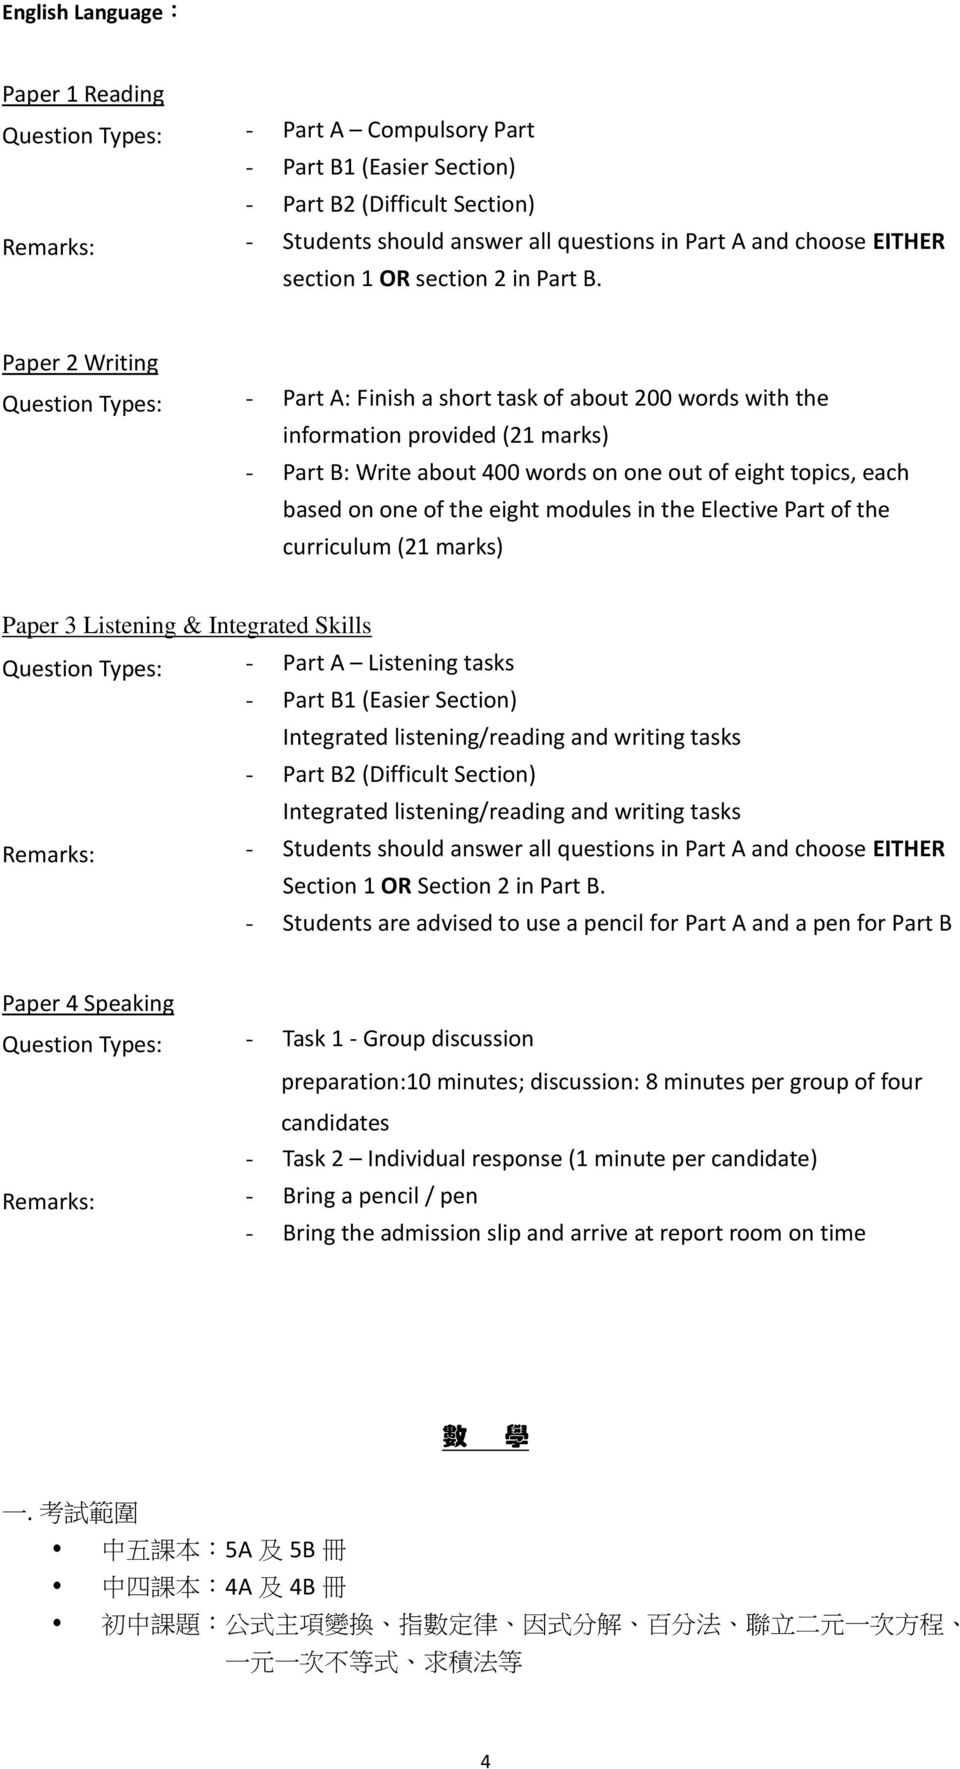 Paper 2 Writing Question Types: - Part A: Finish a short task of about 200 words with the information provided (21 marks) - Part B: Write about 400 words on one out of eight topics, each based on one